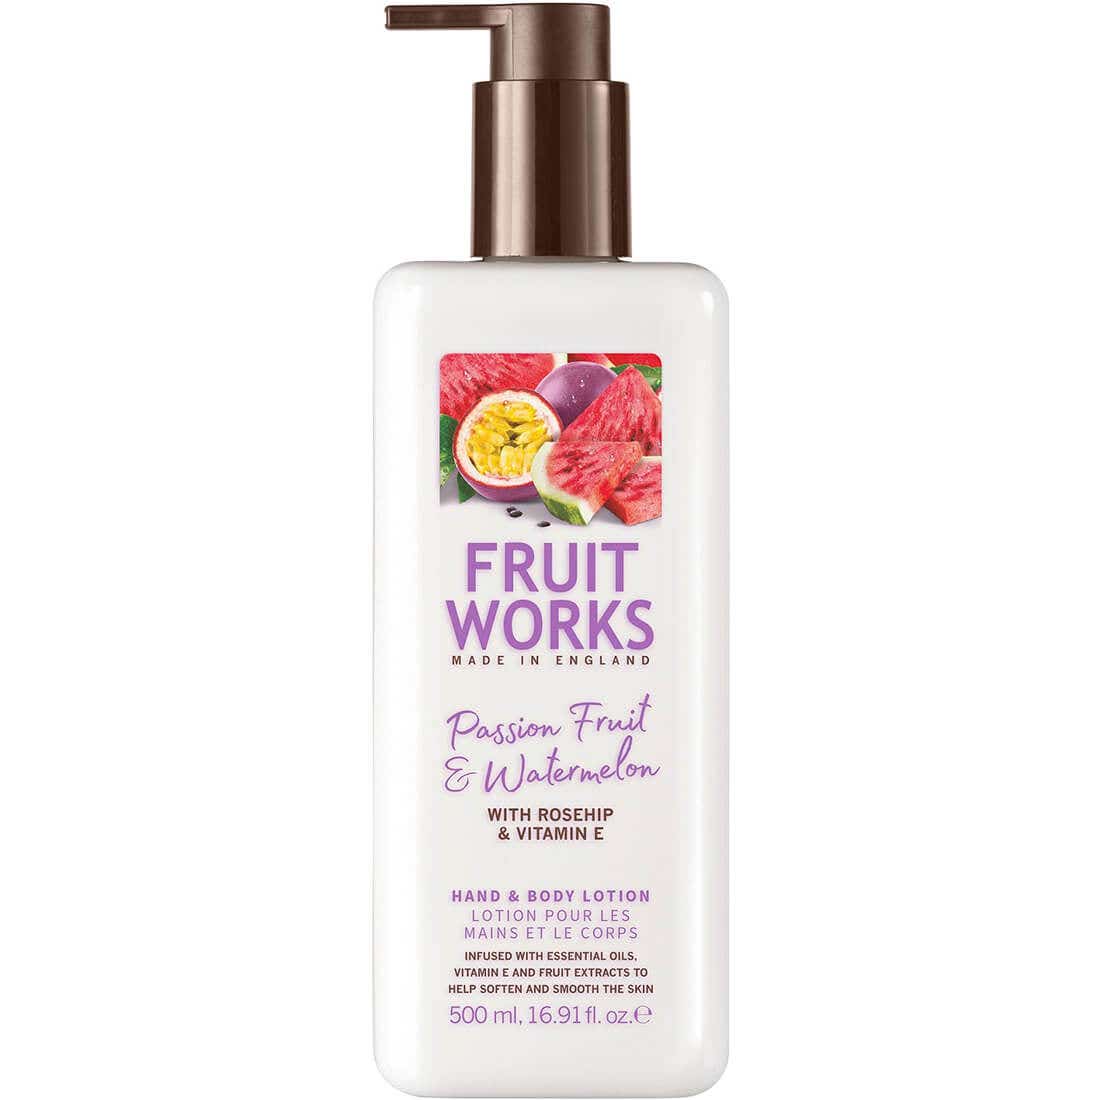 Fruitworks passion fruit body lotion 500ml